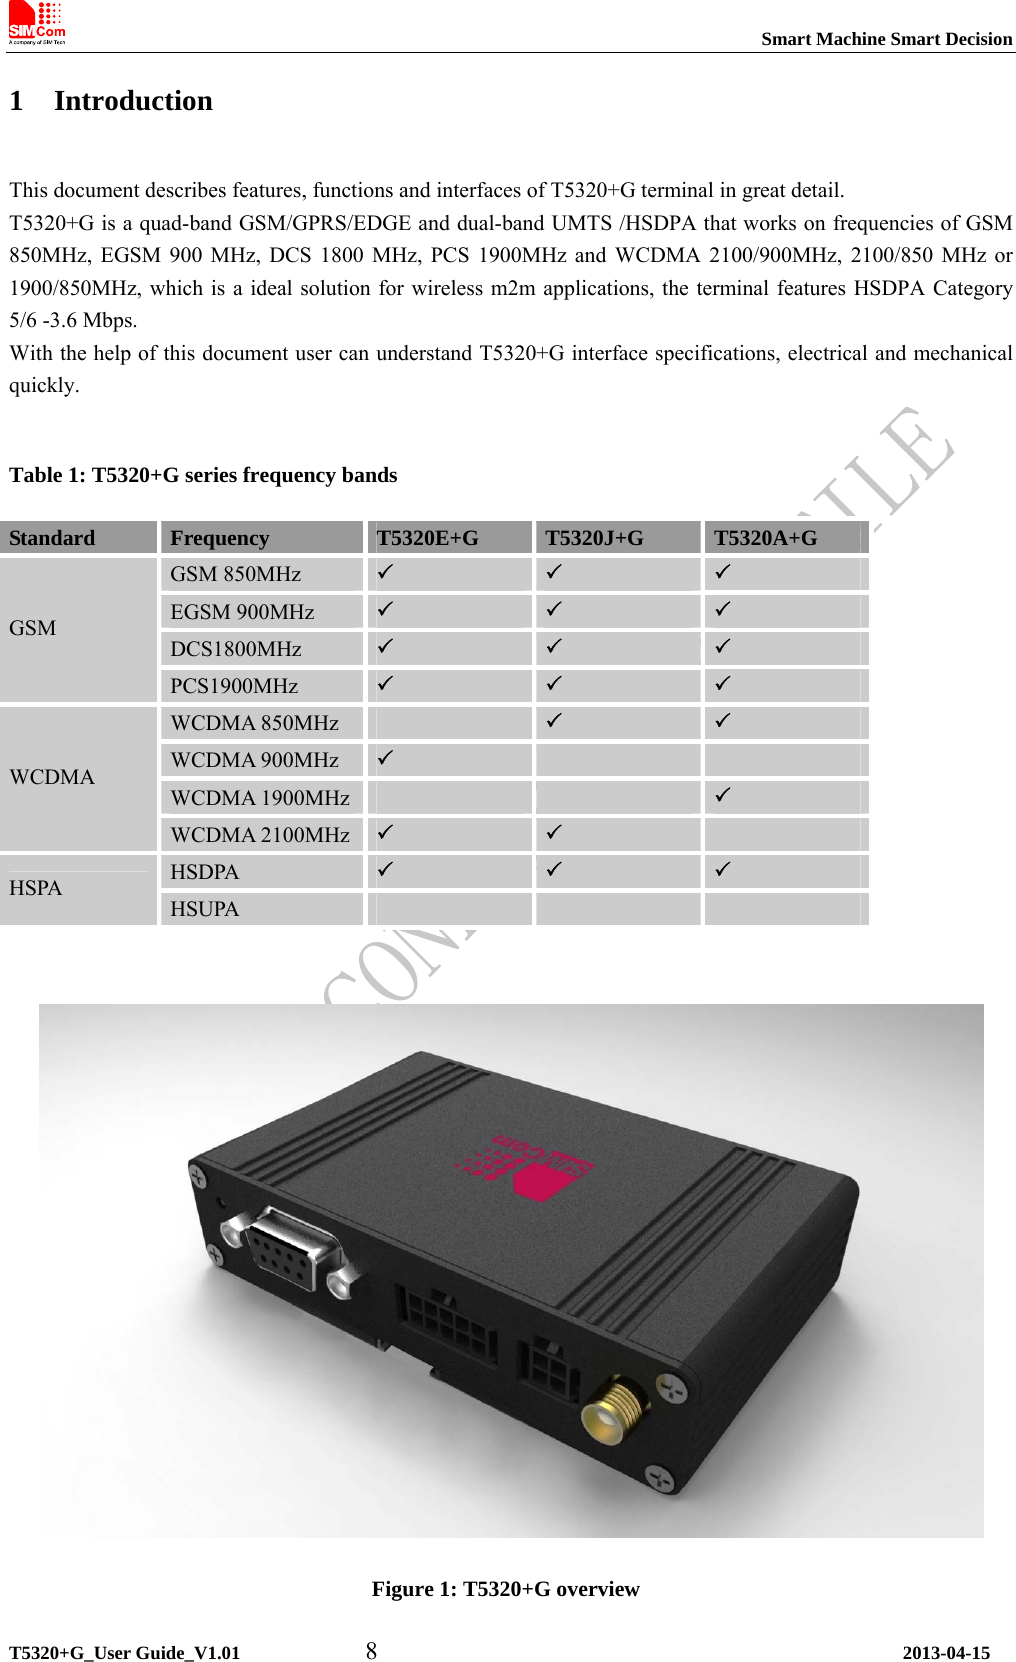                                                                           Smart Machine Smart Decision             1 Introduction This document describes features, functions and interfaces of T5320+G terminal in great detail.   T5320+G is a quad-band GSM/GPRS/EDGE and dual-band UMTS /HSDPA that works on frequencies of GSM 850MHz, EGSM 900 MHz, DCS 1800 MHz, PCS 1900MHz and WCDMA 2100/900MHz, 2100/850 MHz or 1900/850MHz, which is a ideal solution for wireless m2m applications, the terminal features HSDPA Category 5/6 -3.6 Mbps. With the help of this document user can understand T5320+G interface specifications, electrical and mechanical quickly.   Table 1: T5320+G series frequency bands Standard  Frequency  T5320E+G  T5320J+G  T5320A+G GSM 850MHz  3 3 3 EGSM 900MHz  3 3 3 DCS1800MHz  3 3 3 GSM PCS1900MHz  3 3 3 WCDMA 850MHz   3 3 WCDMA 900MHz  3    WCDMA 1900MHz    3 WCDMA WCDMA 2100MHz  3 3  HSDPA  3 3 3 HSPA HSUPA        Figure 1: T5320+G overview   T5320+G_User Guide_V1.01          8                                          2013-04-15 